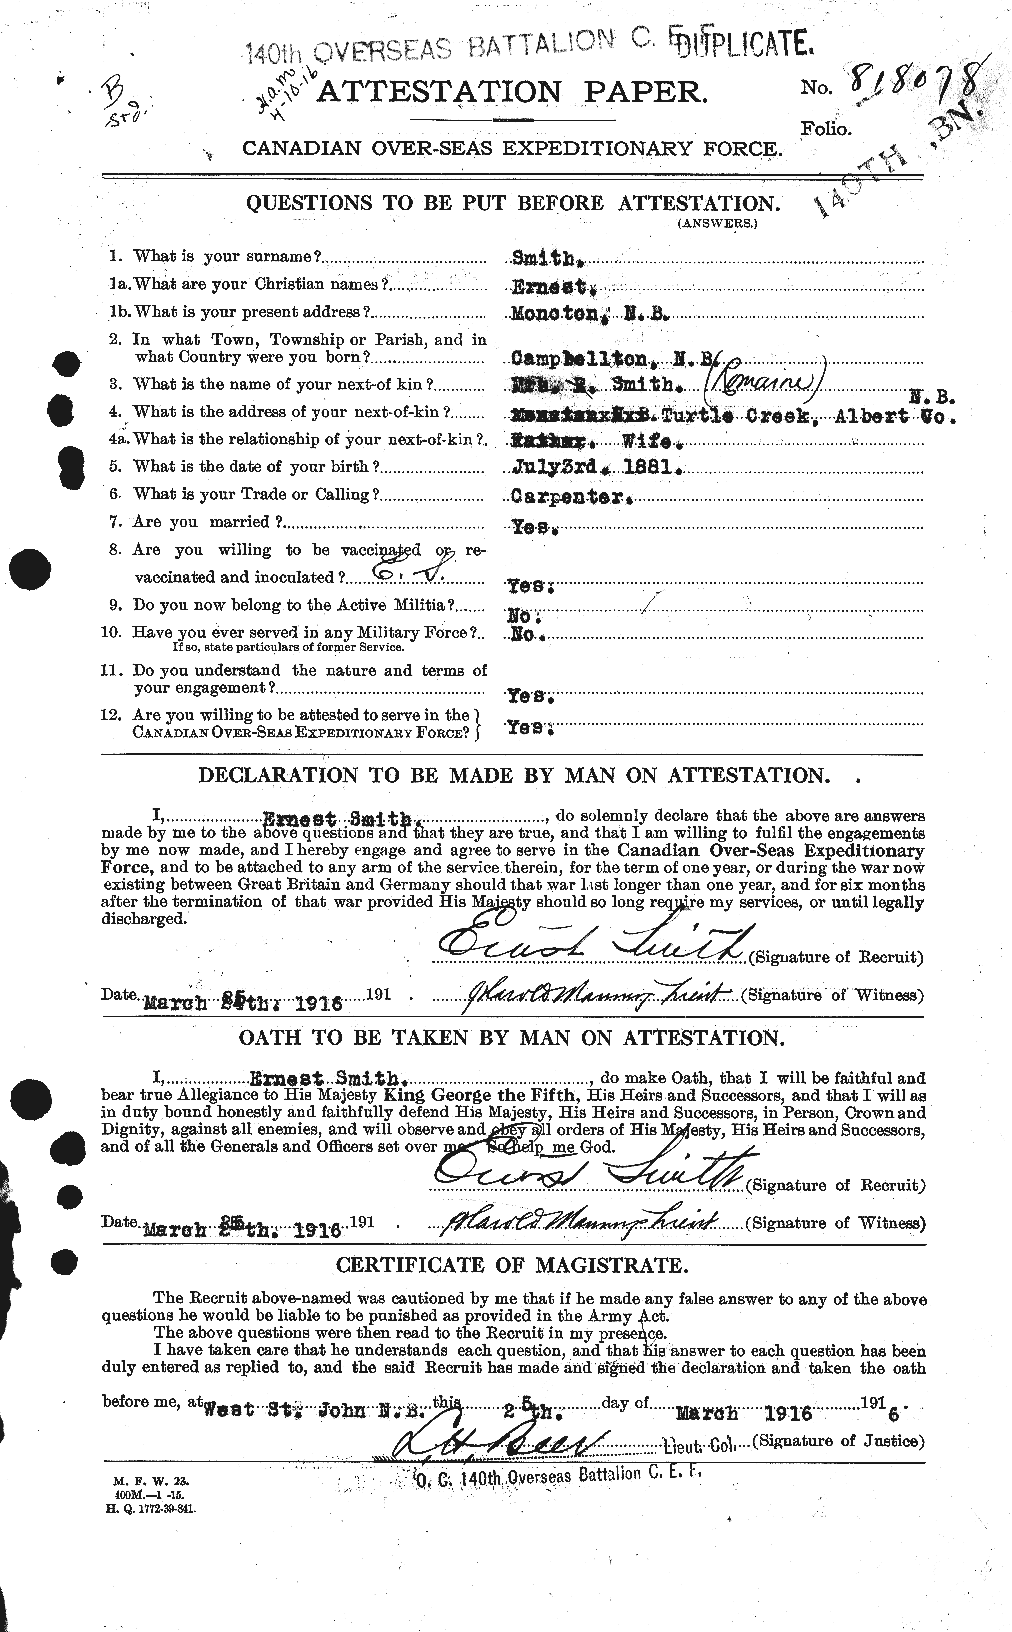 Personnel Records of the First World War - CEF 621172a